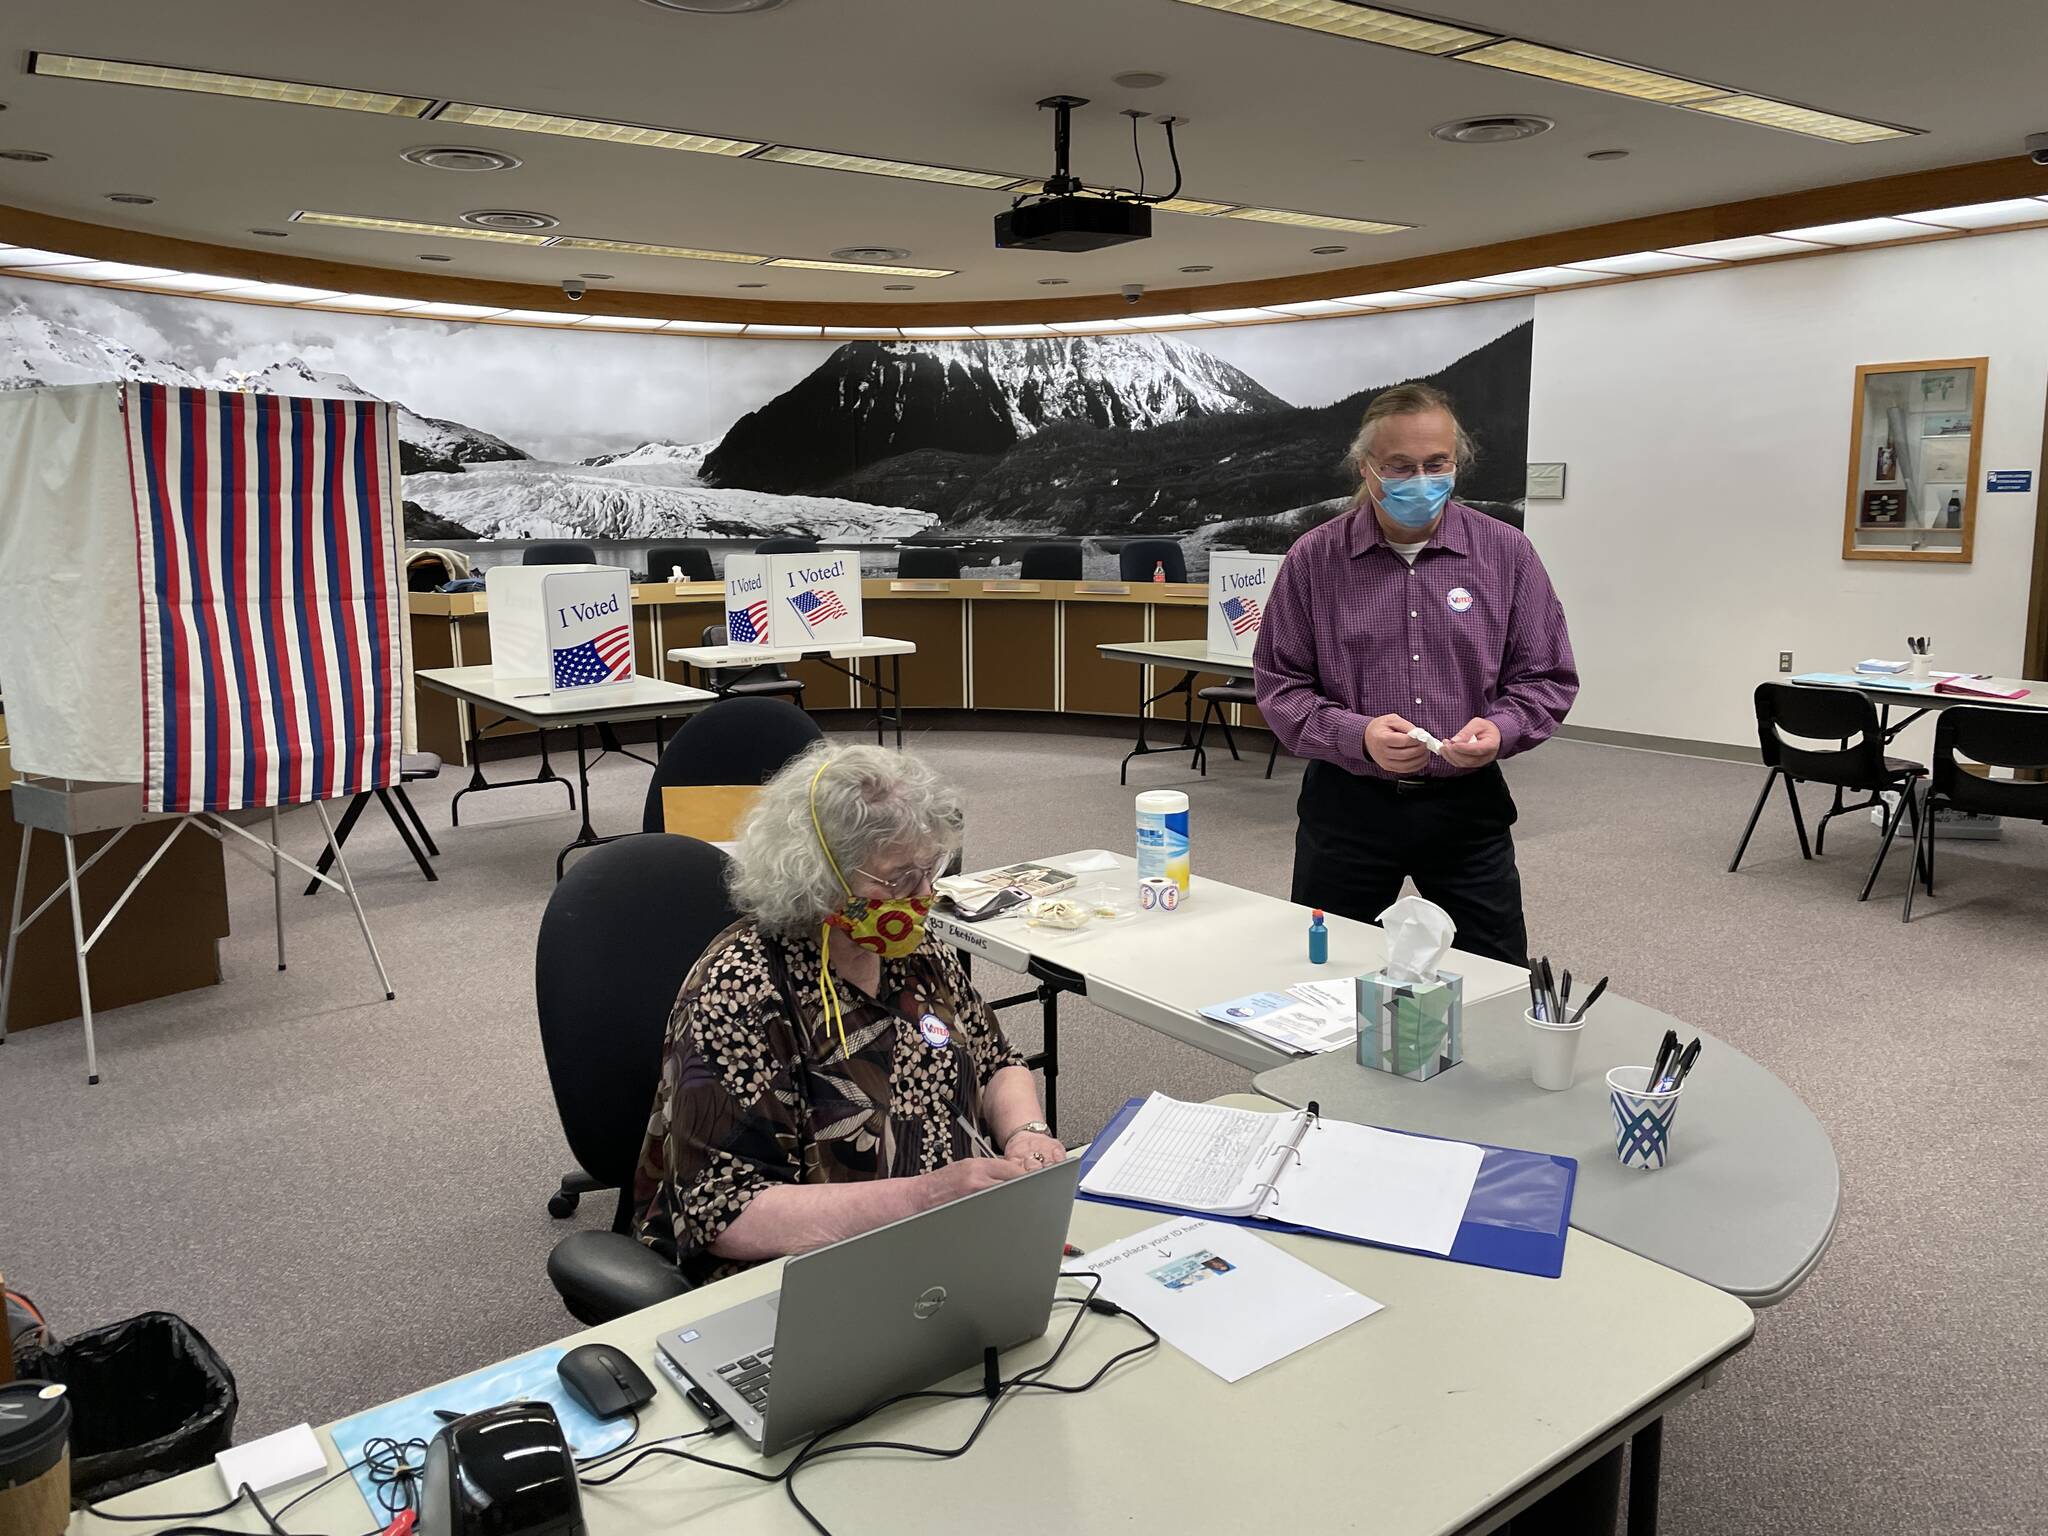 Michael S. Lockett / Juneau Empire 
Election workers Nora Laughlin and Bob Laurie staff the City Hall election station on the last day of voting for Juneau’s municipal election, Oct. 5, 2021.